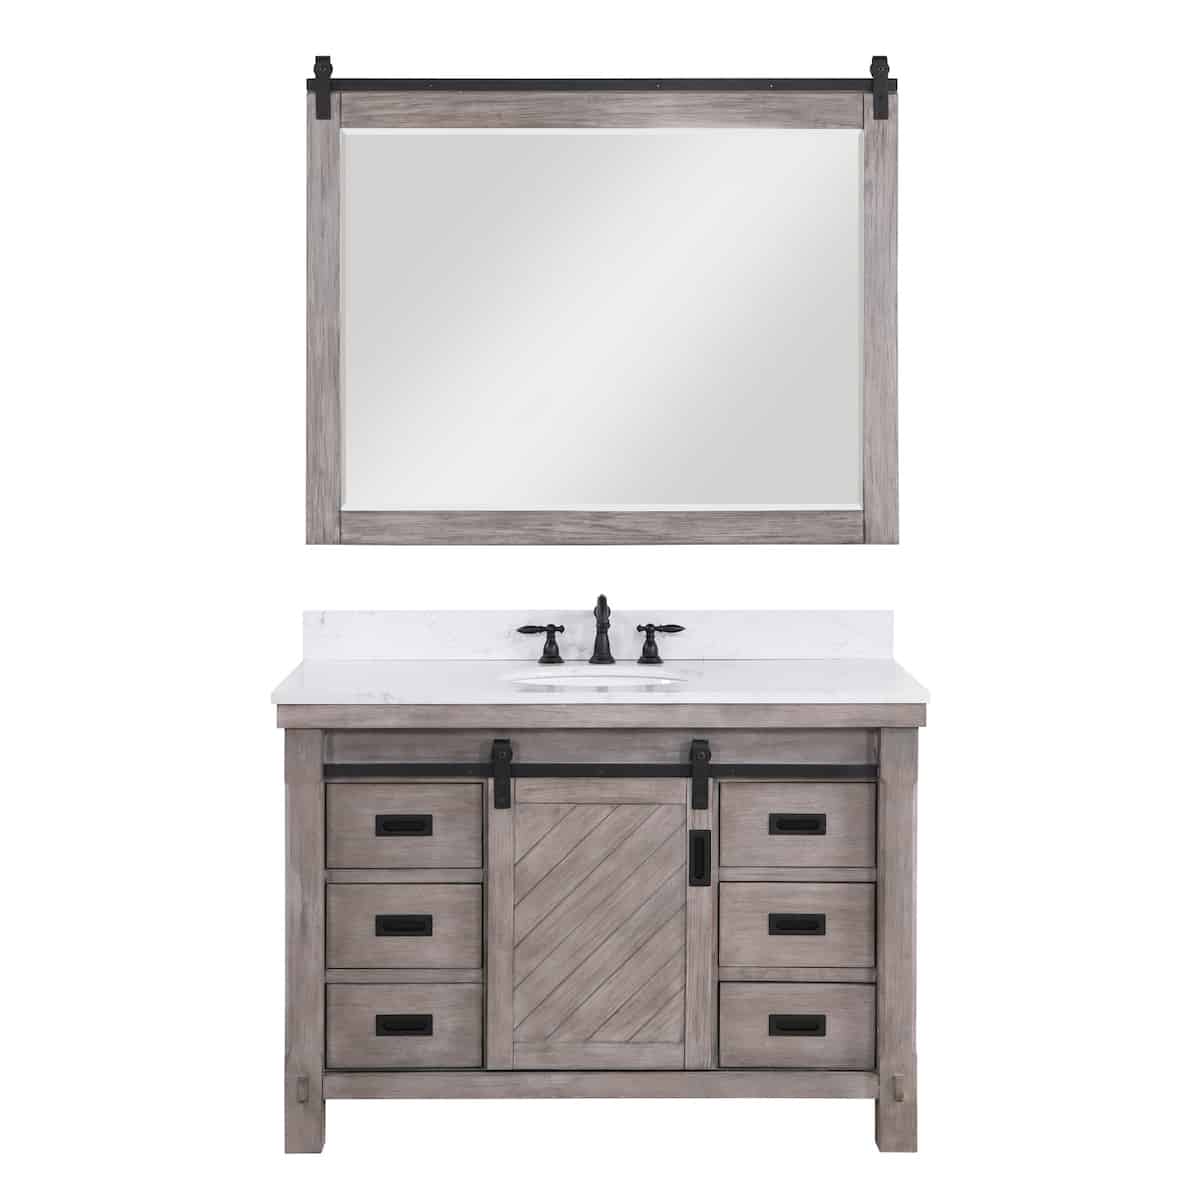 Vinnova Cortes 48 Inch Freestanding Single Sink Bath Vanity in Classical Grey with White Composite Countertop With Mirror 701748-CR-WS